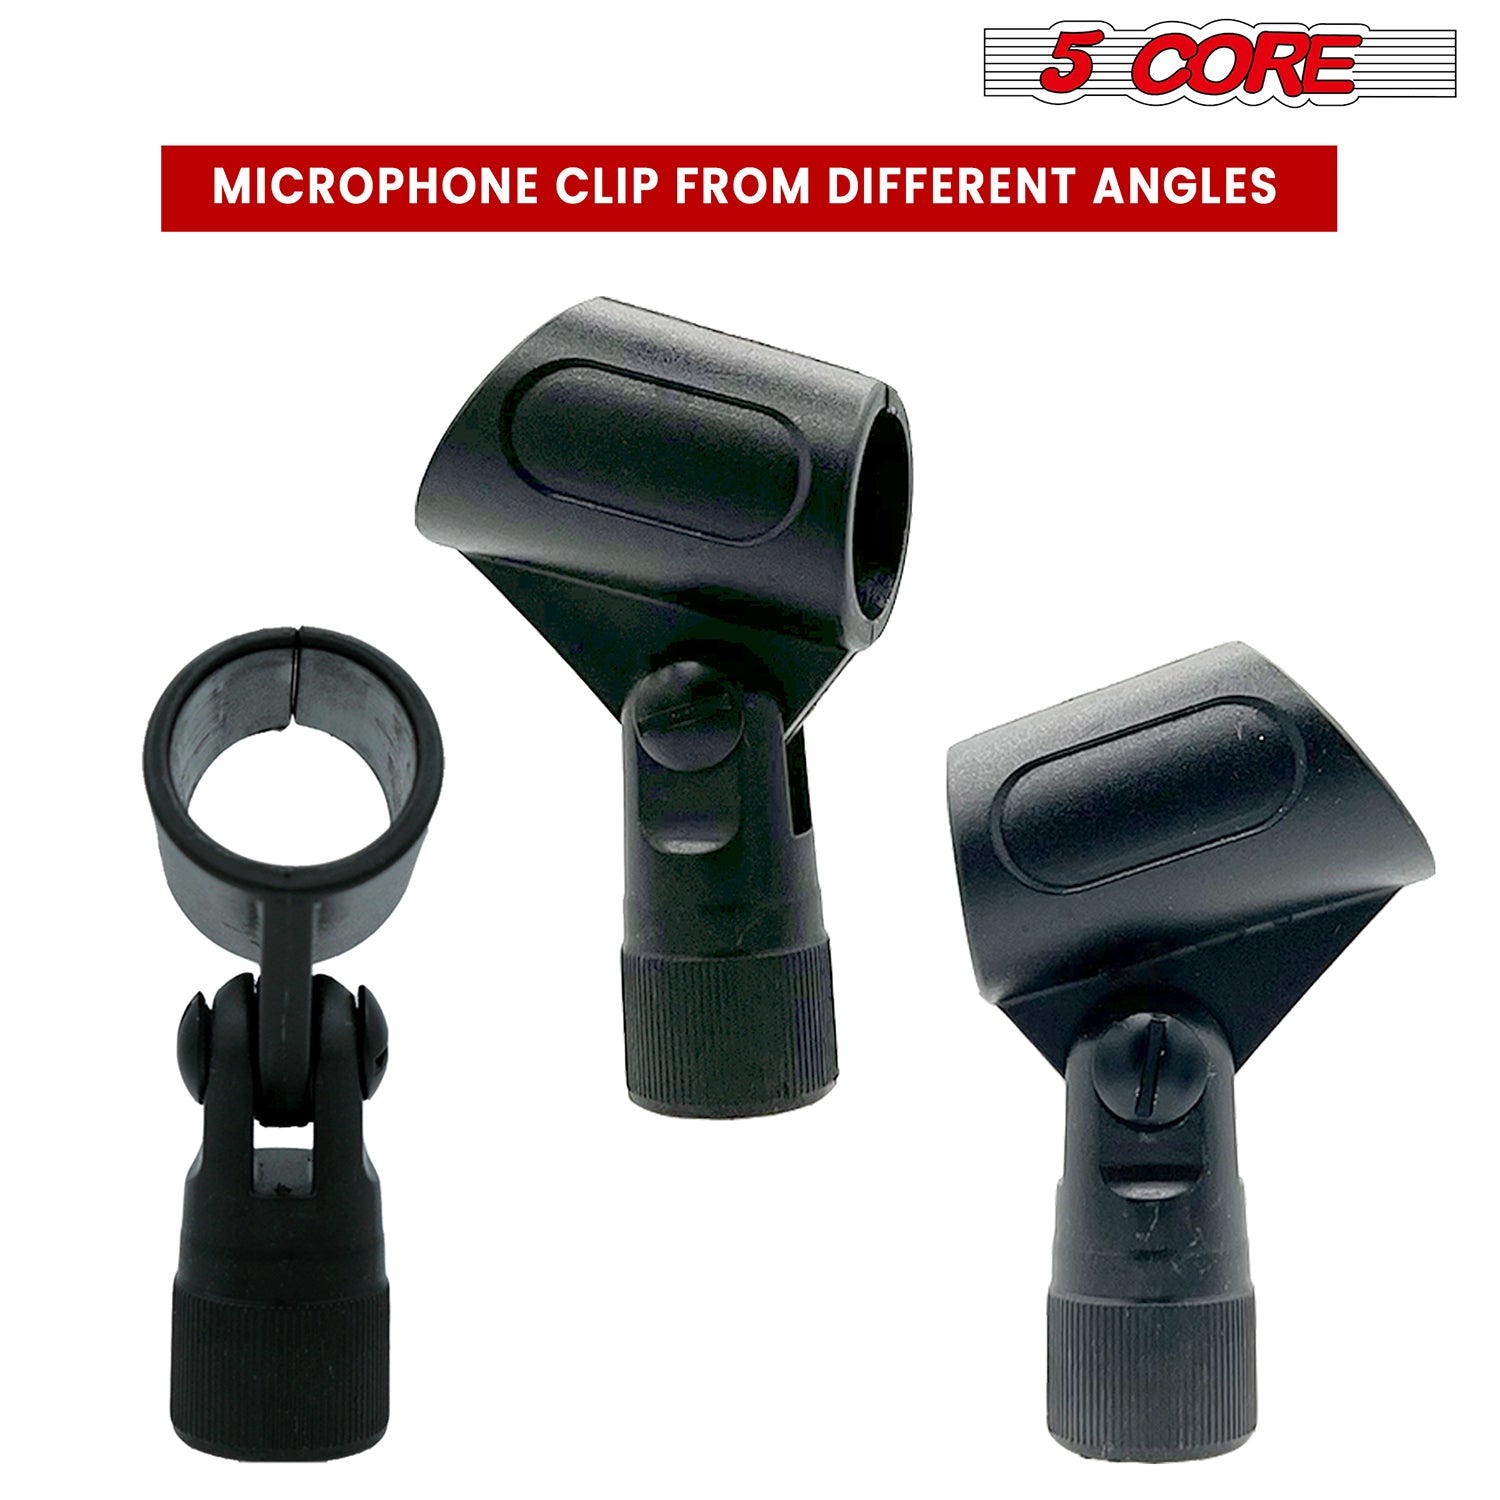 5 Core Microphone Clip Holder 6 Pieces with Screw Adapters 5/8 to 3/8 Inch